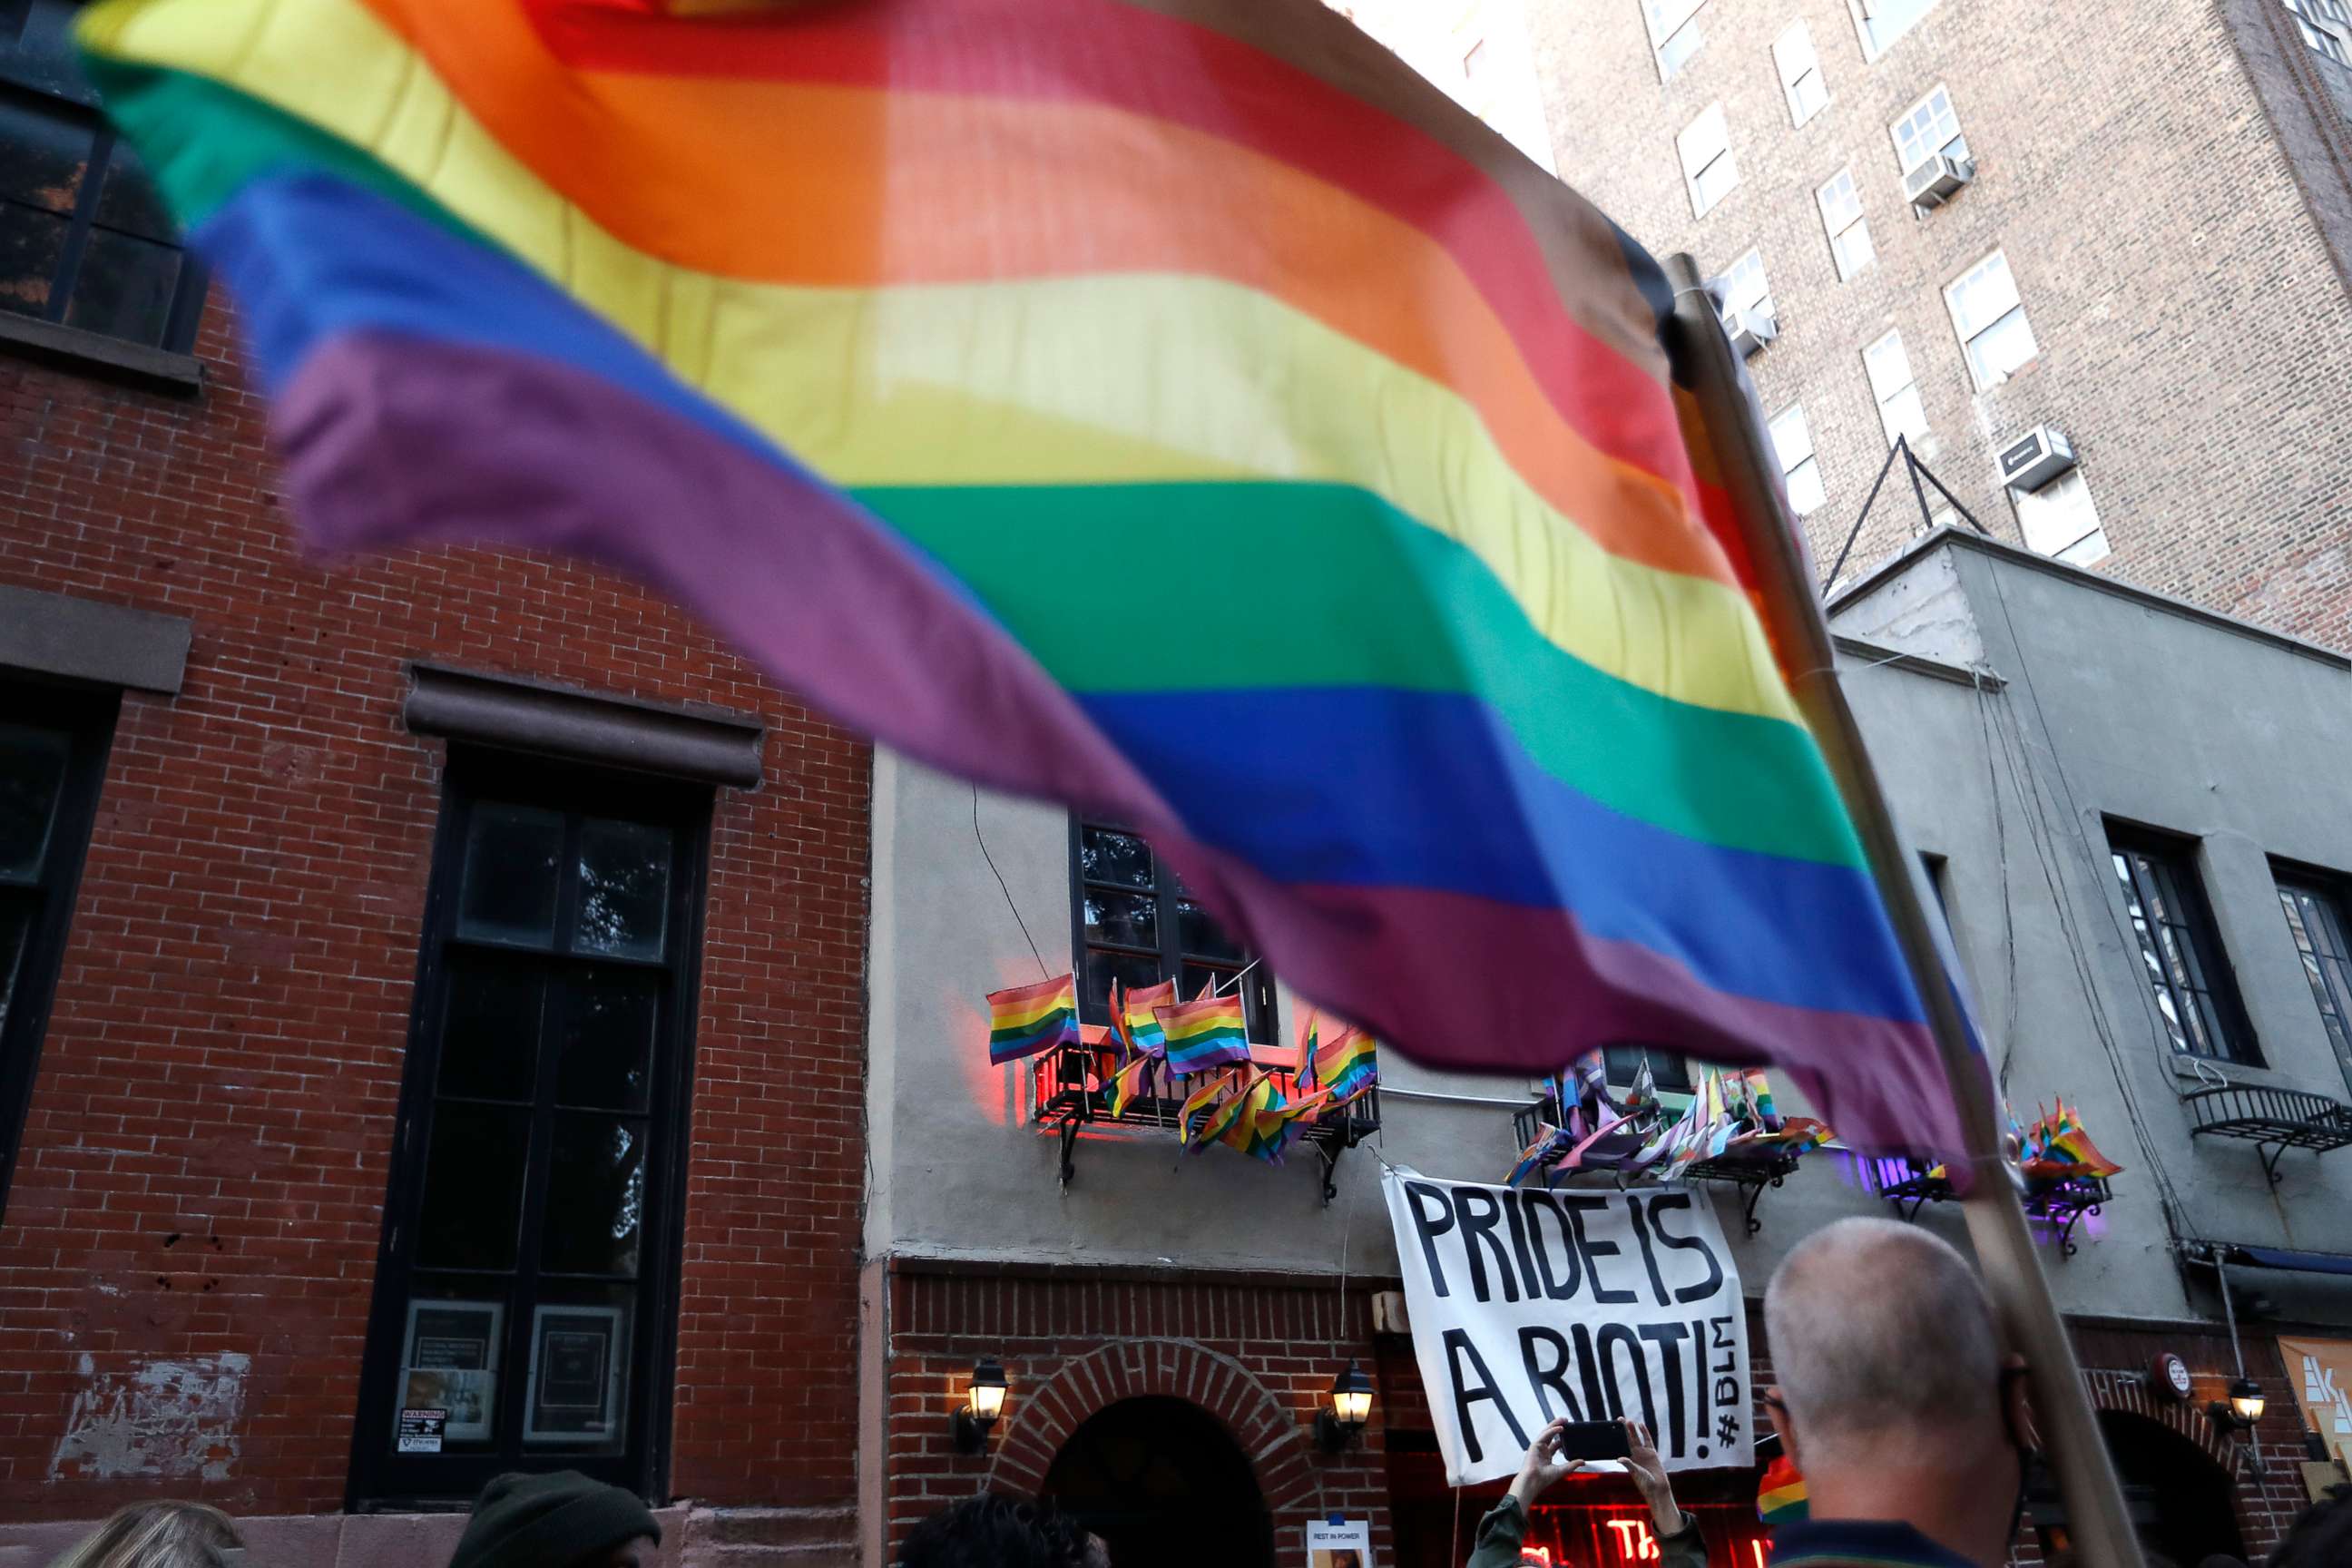 PHOTO: People gather at the historic Stonewall Inn to celebrate the LGBTQ victory, in Greenwich Village, June 15, 2020.